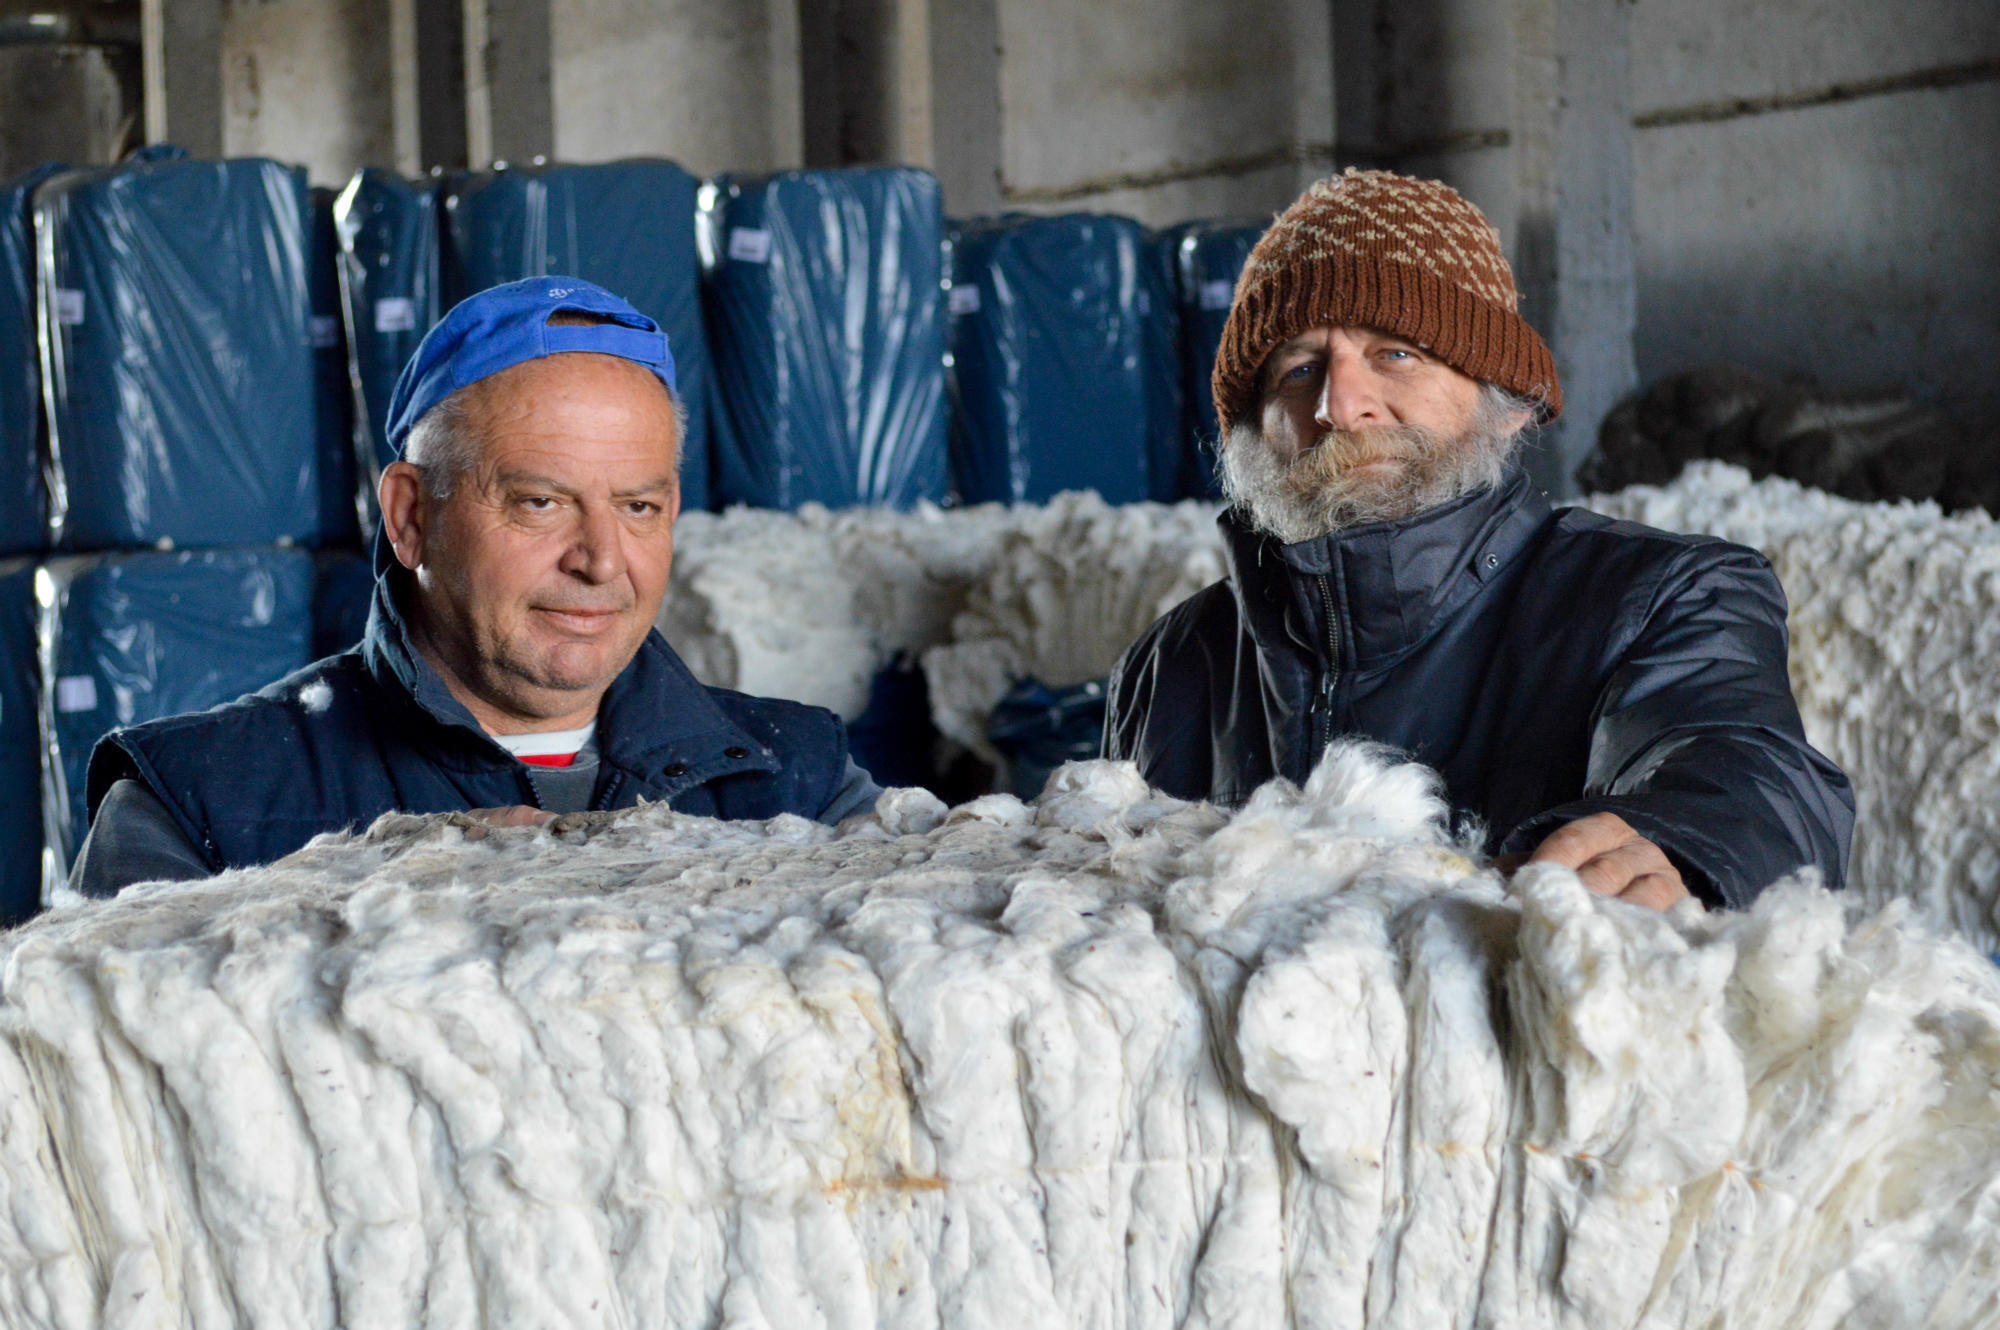  Agriculture: Better Cotton Initiative to certify Greek cotton 